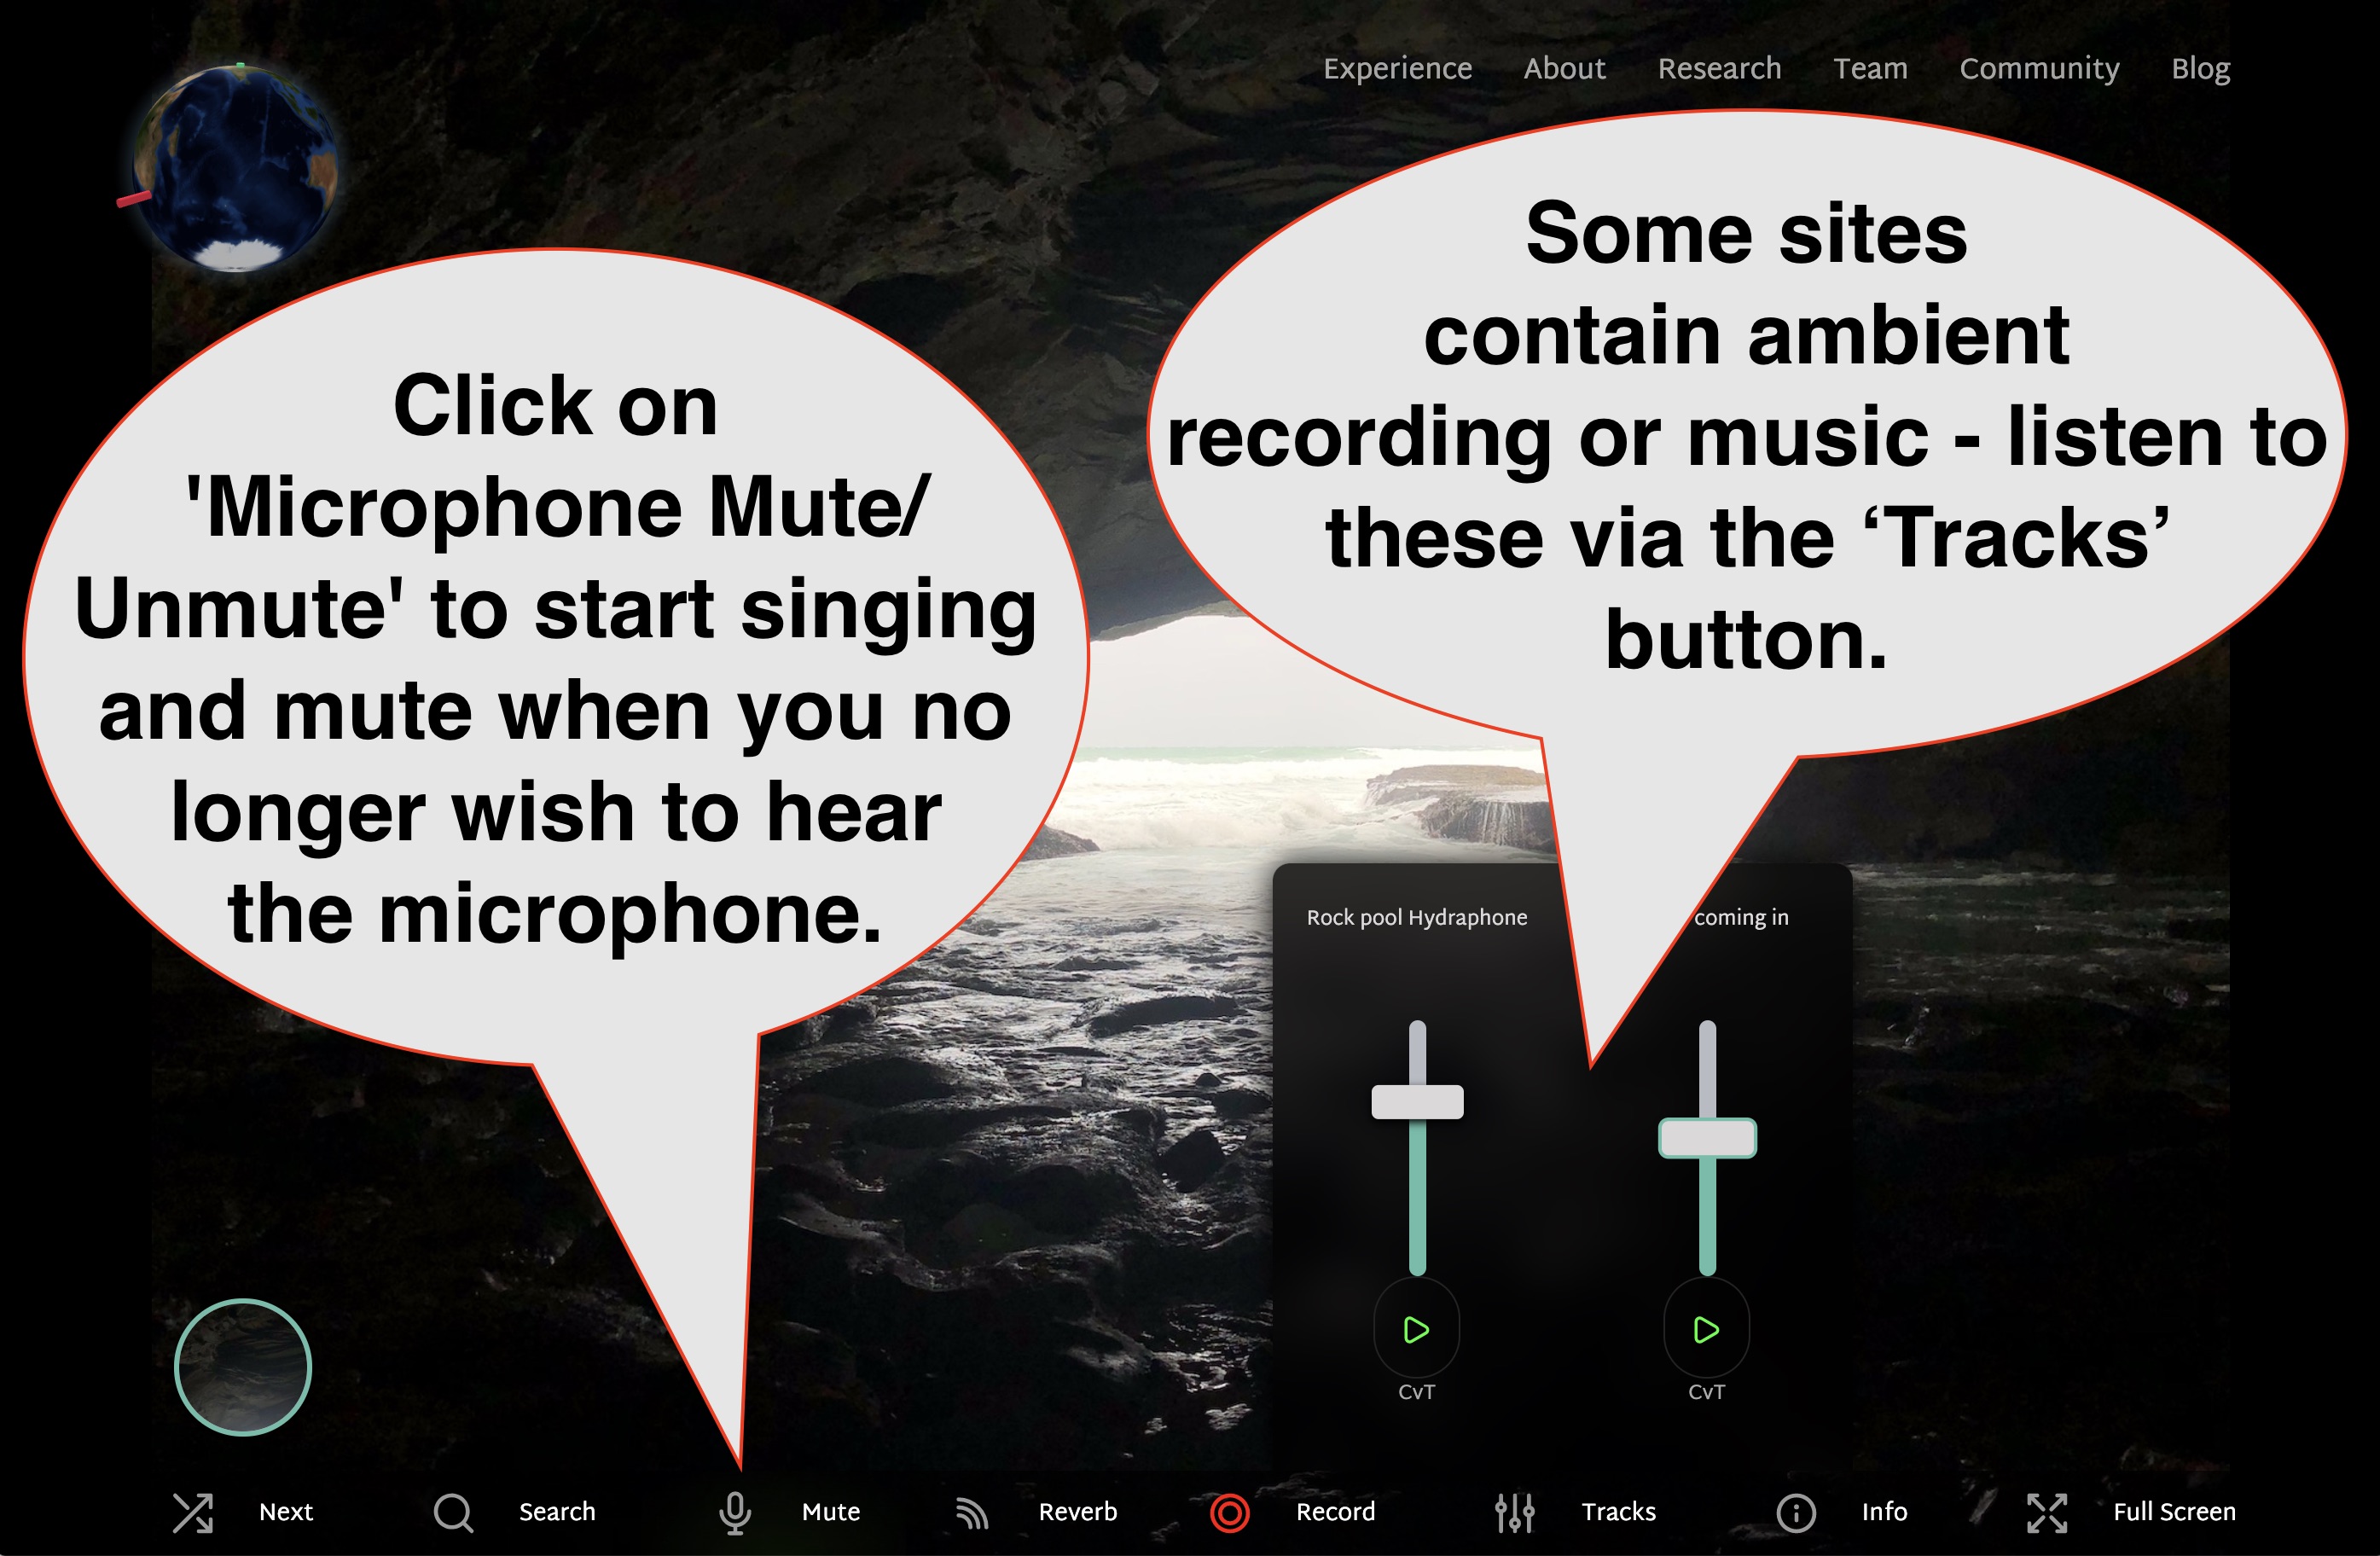 further explanations of bottom crontrol strip: click on the 'mic' icon to mute or unmute the microphone and next to it. Some sites also contain ambient recording or music tracks, click on the 'tracks' icon to listen and set the volume